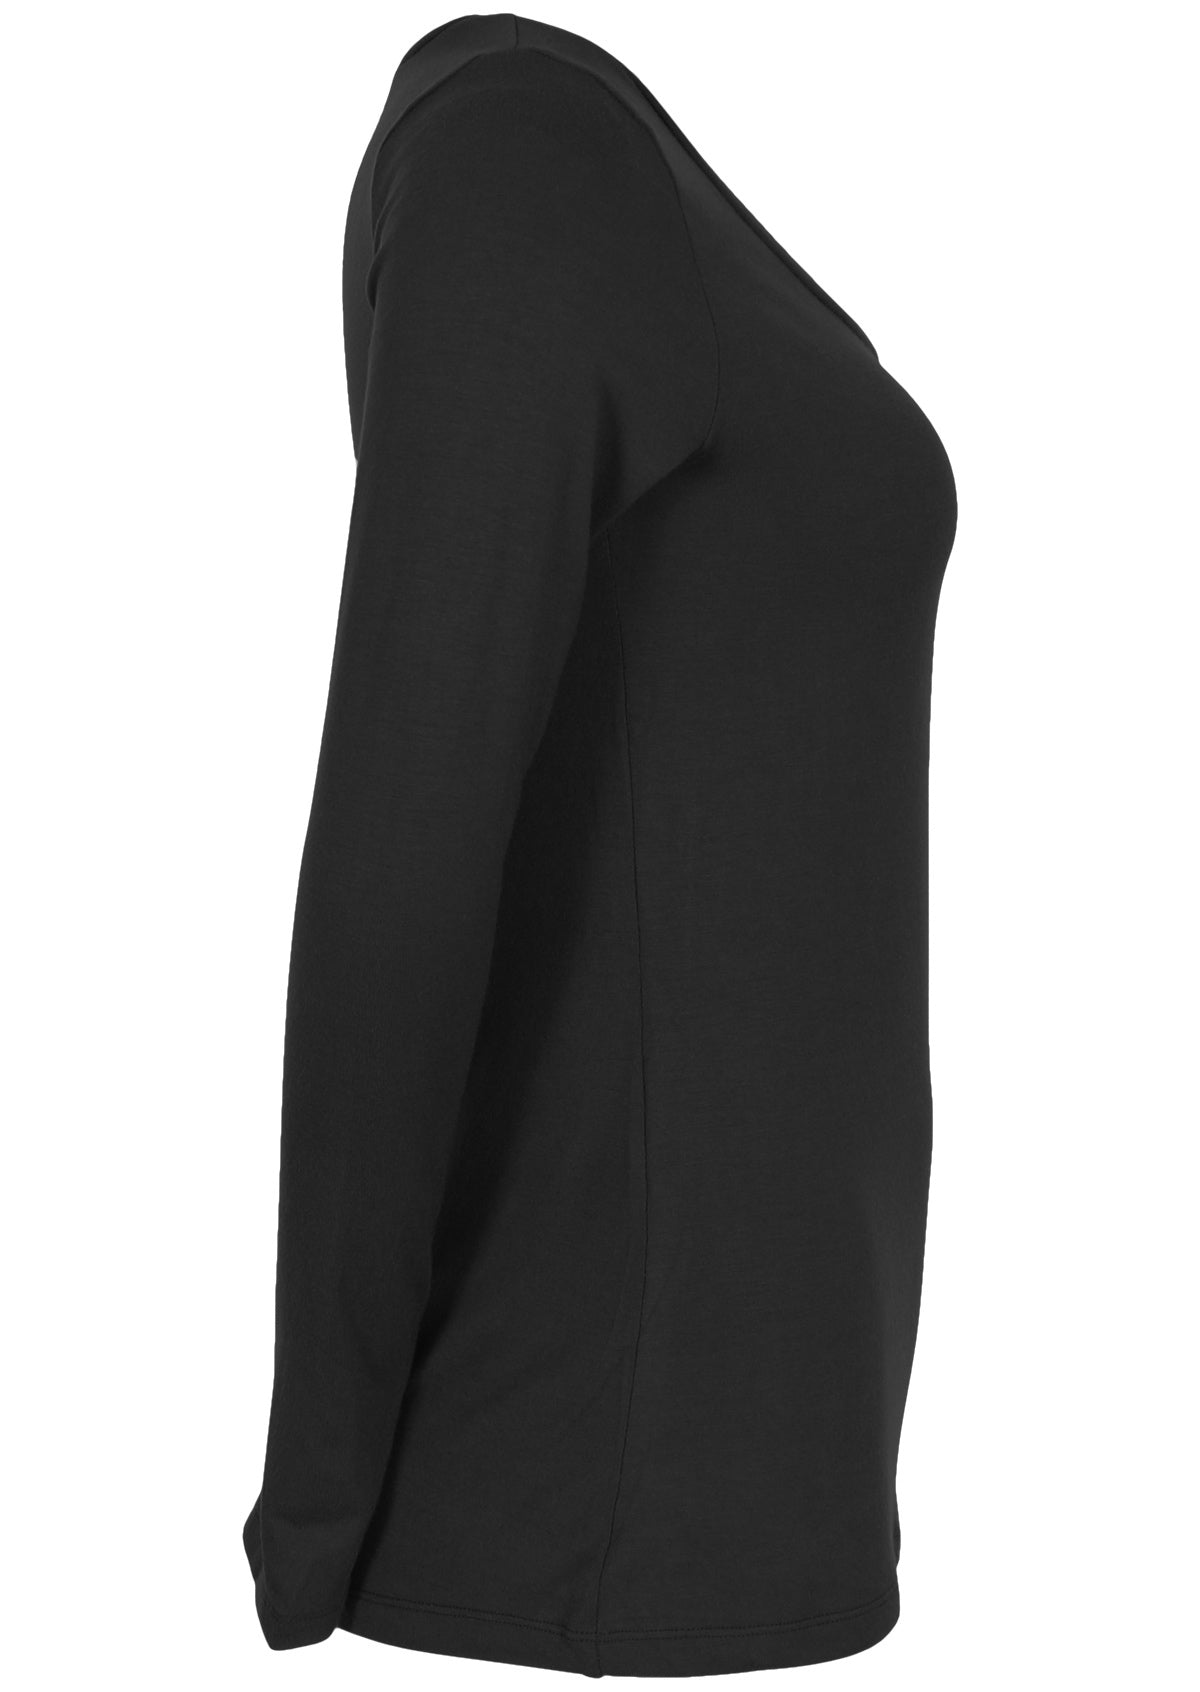 Side view of women's black long sleeve stretch v-neck soft rayon top.